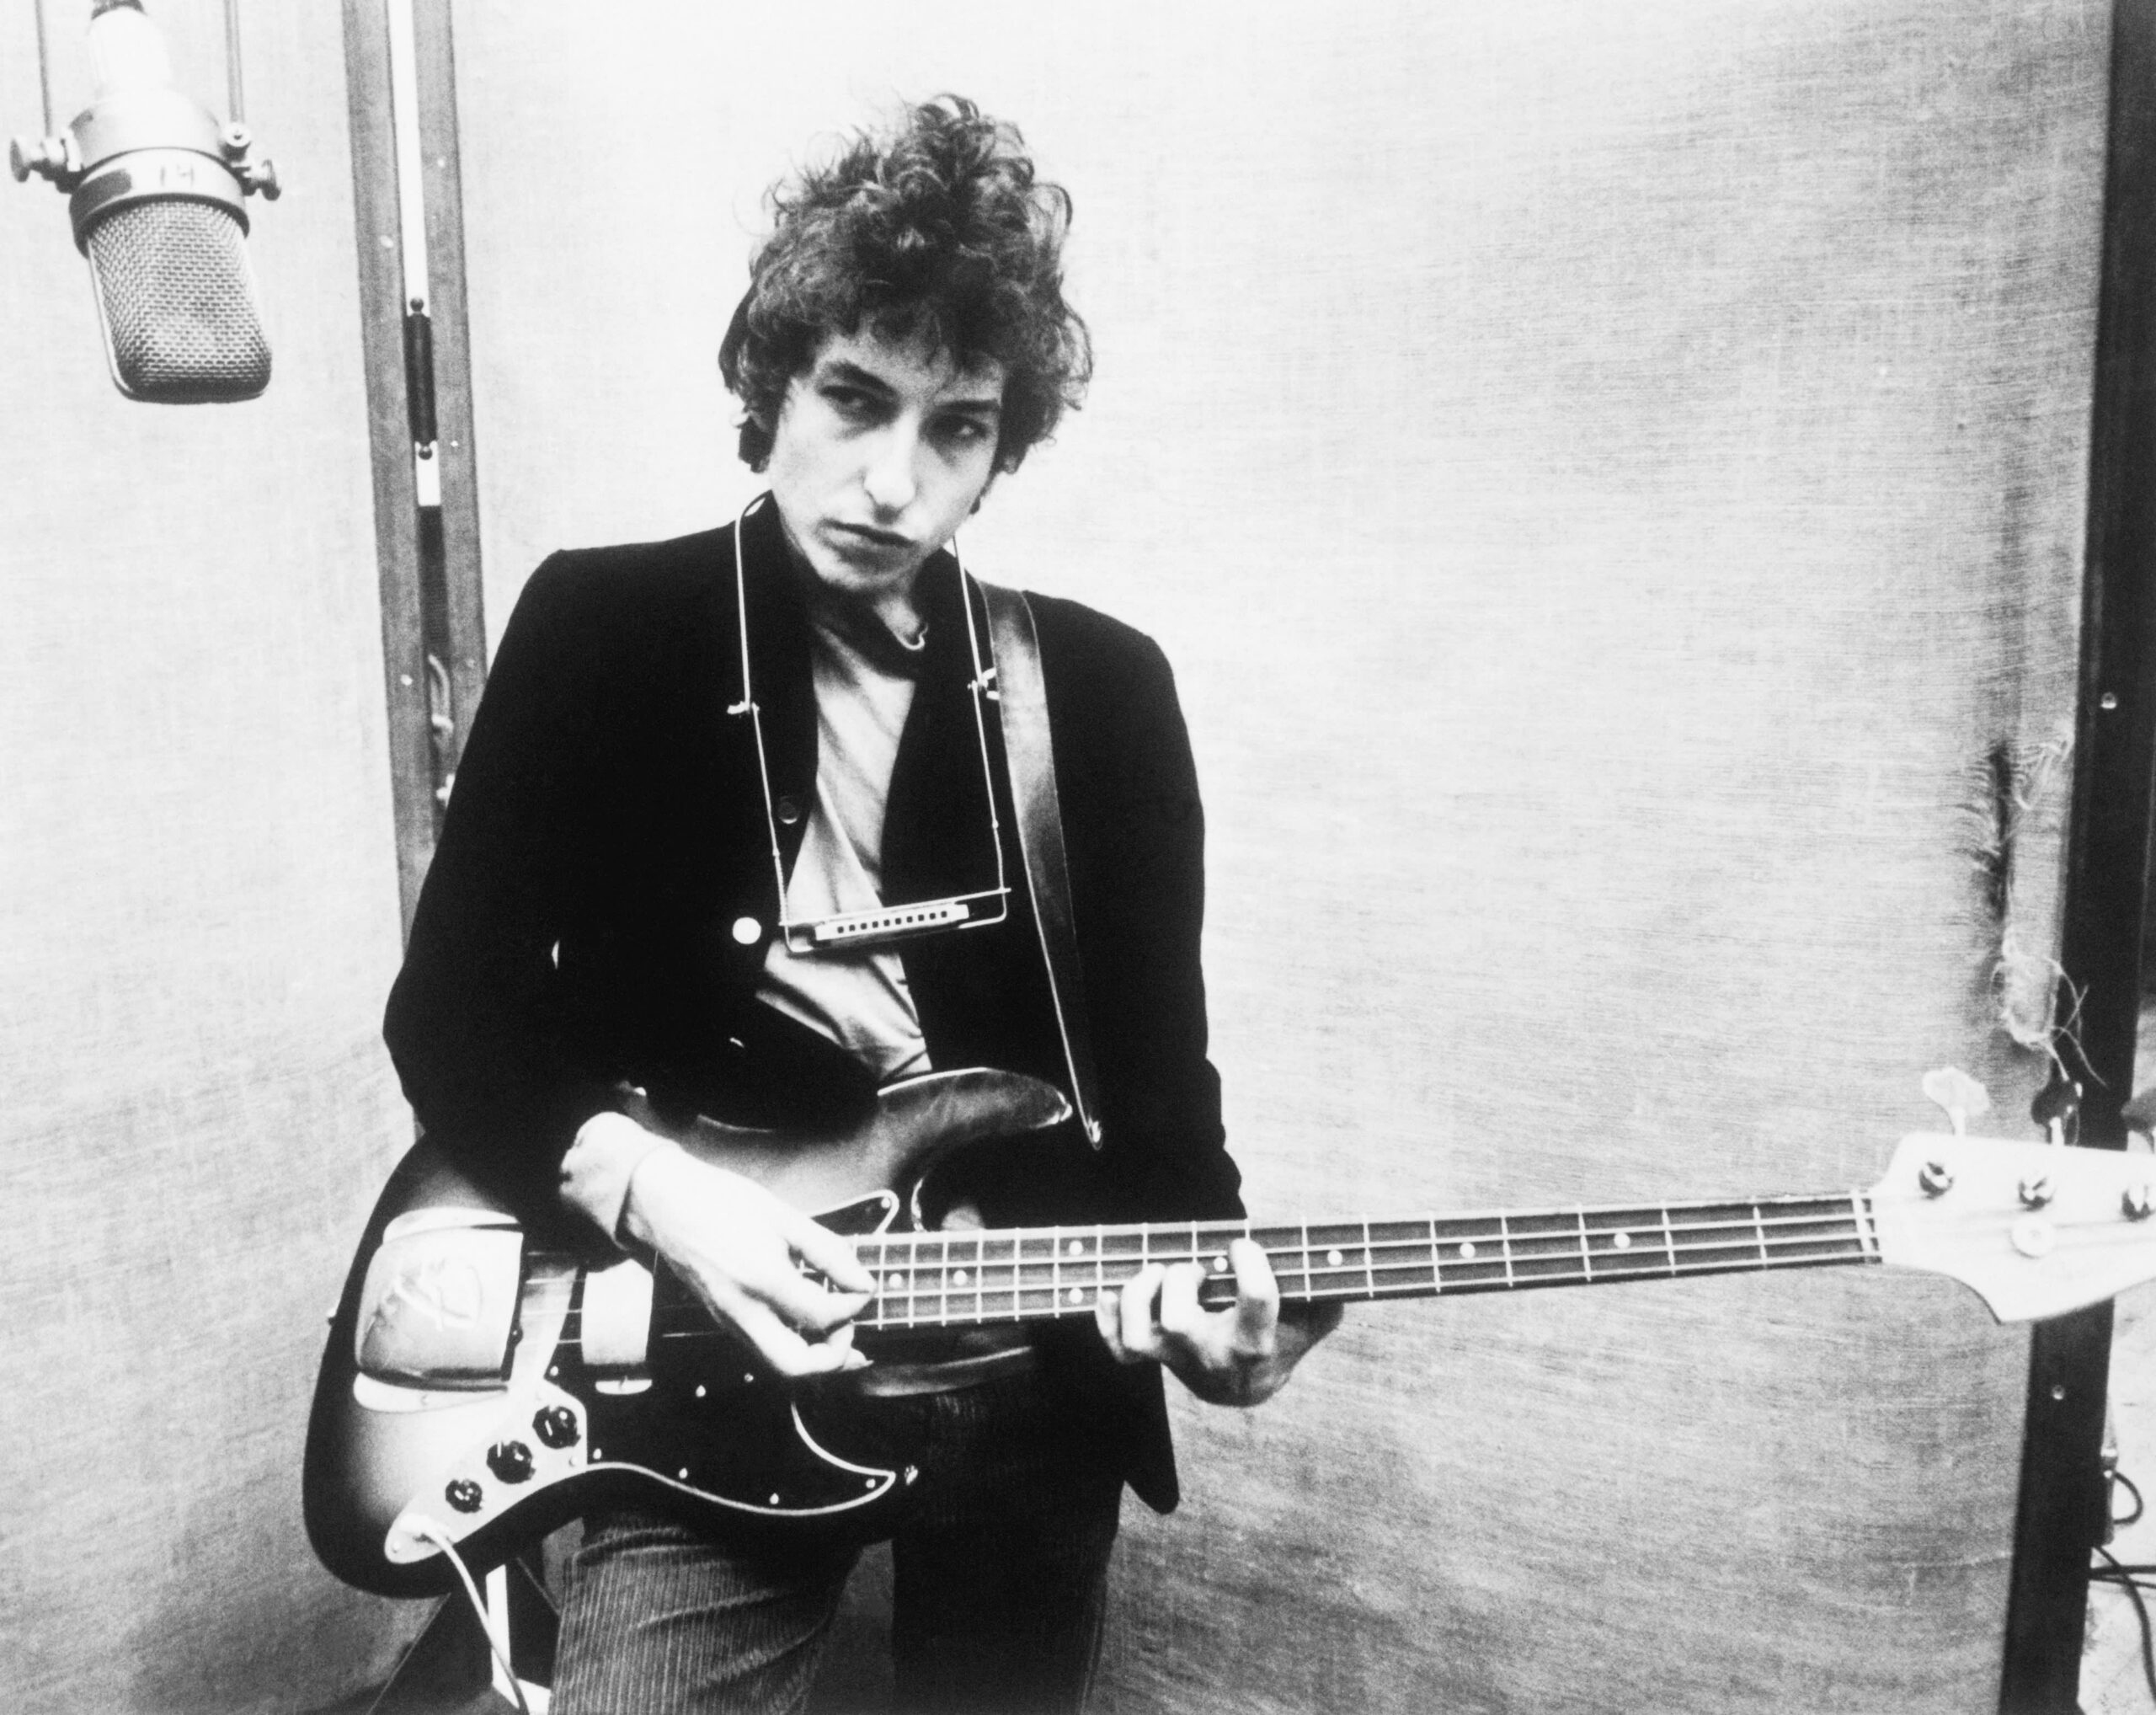 Bob Dylan sued for allegedly sexually abusing woman in 1960s